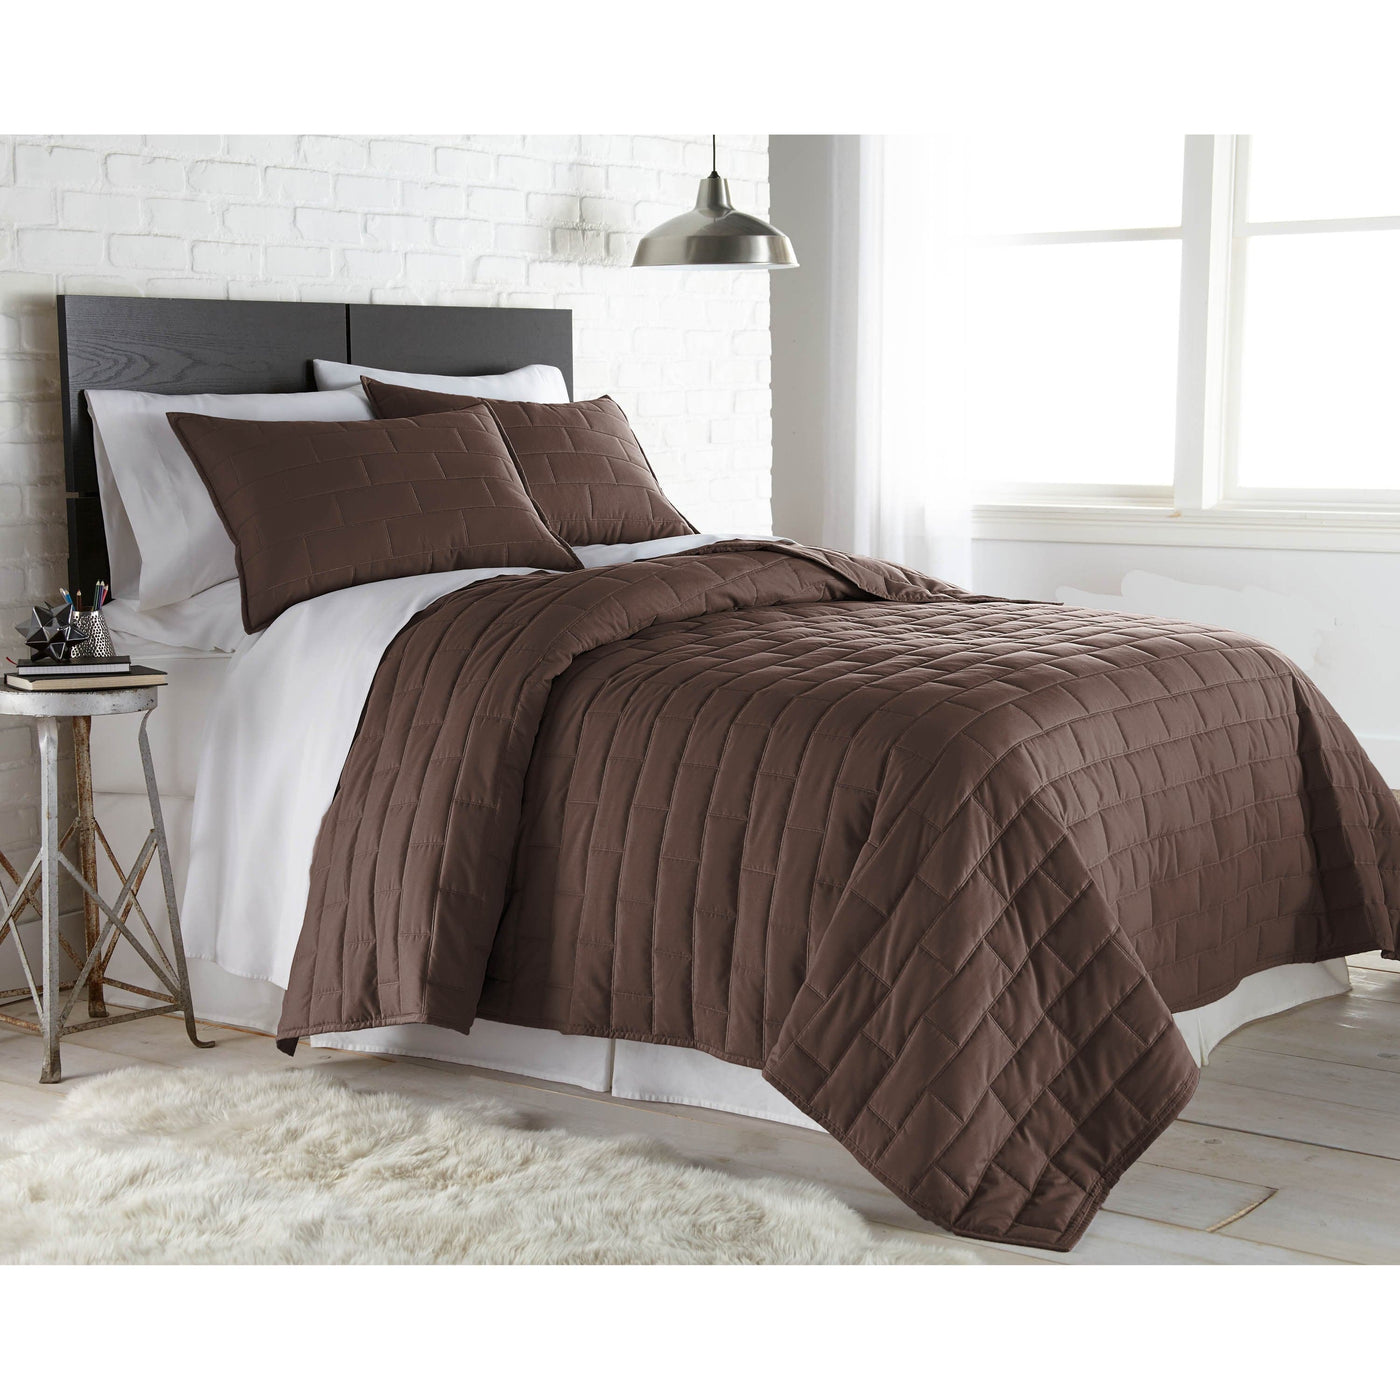 Front View of Vilano Brickyard Quilt Set in brown#color_vilano-chocolate-brown